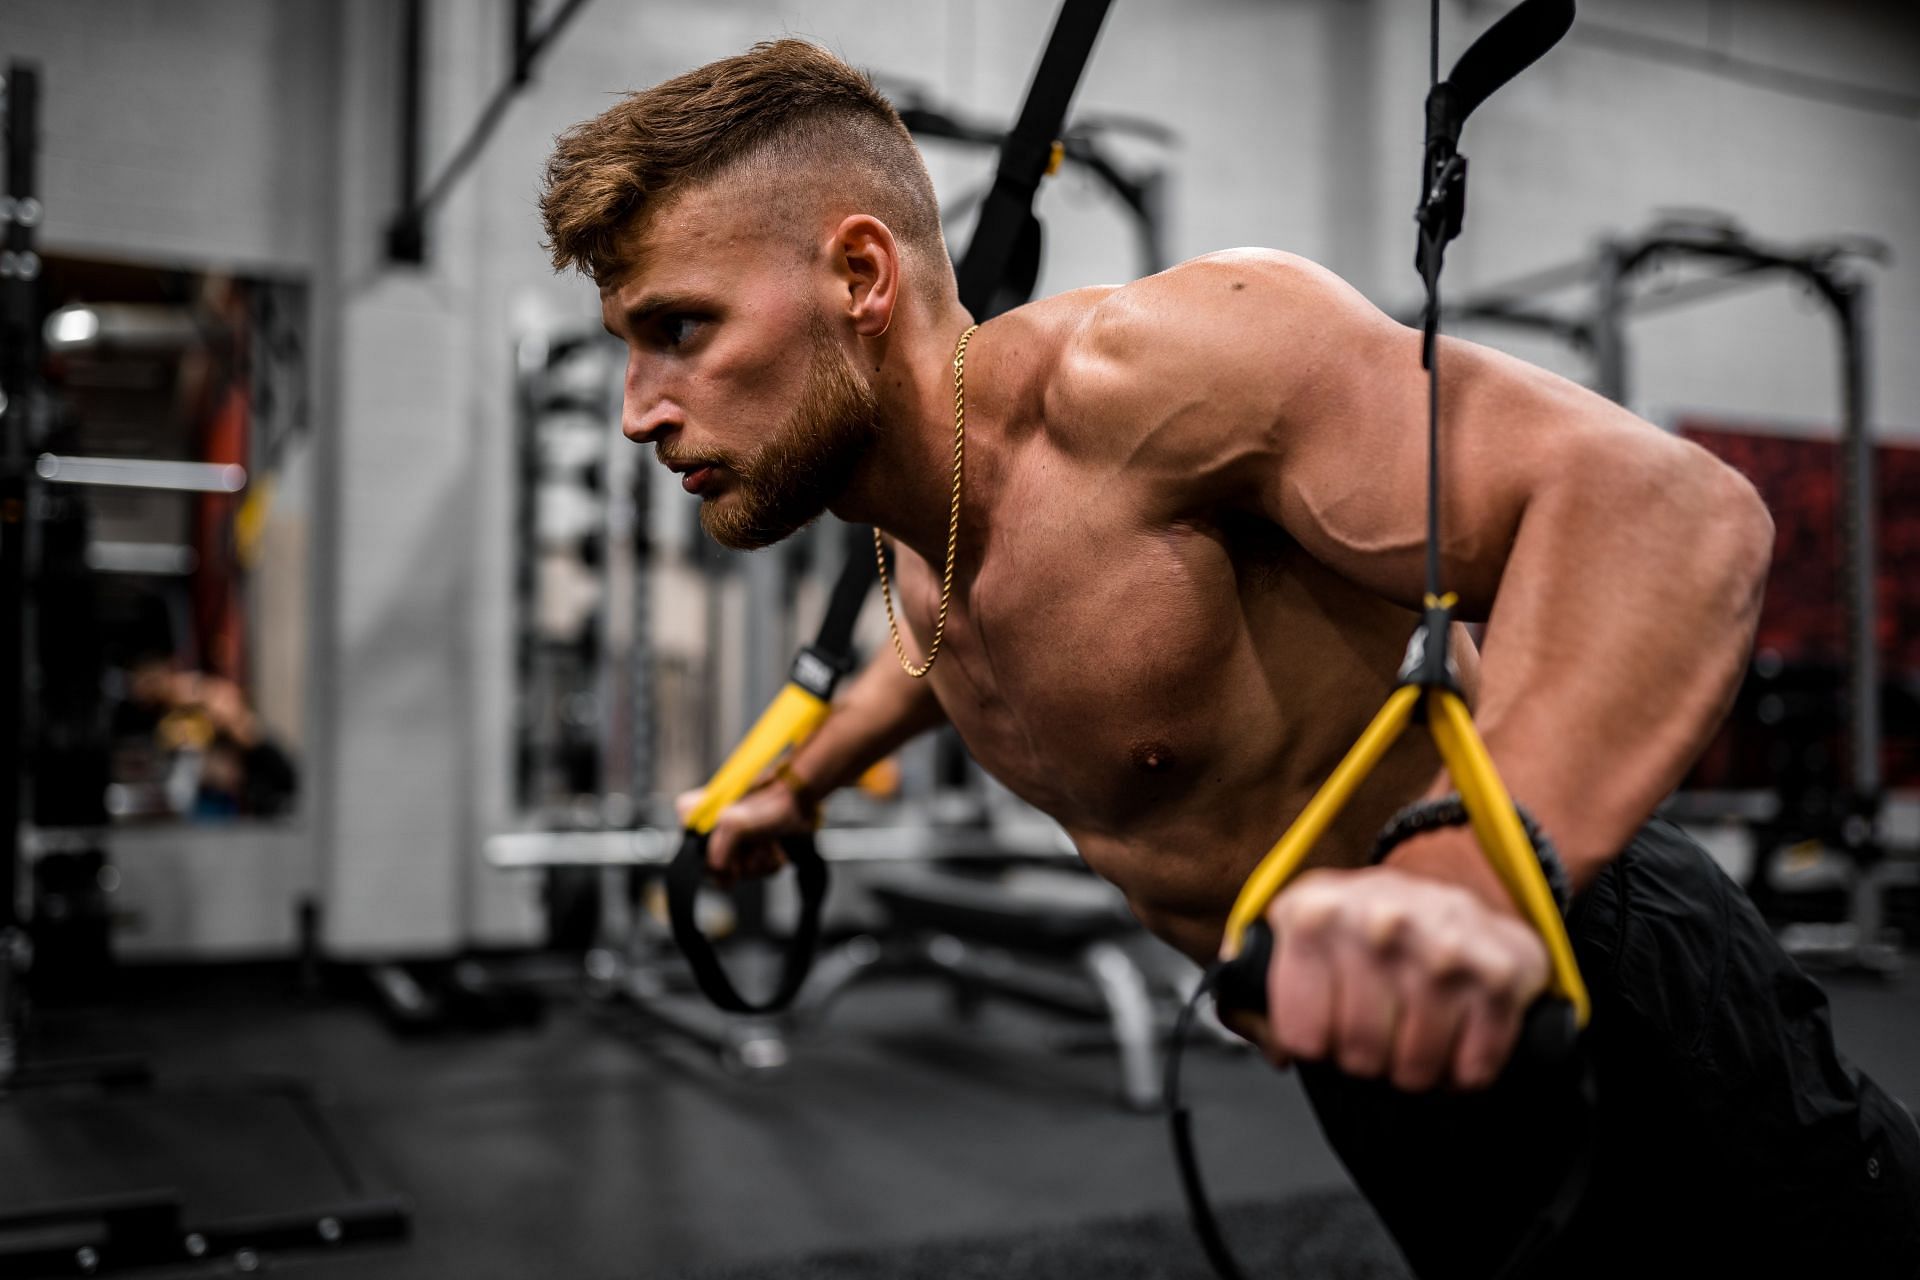 Try these 5 cable exercises if you